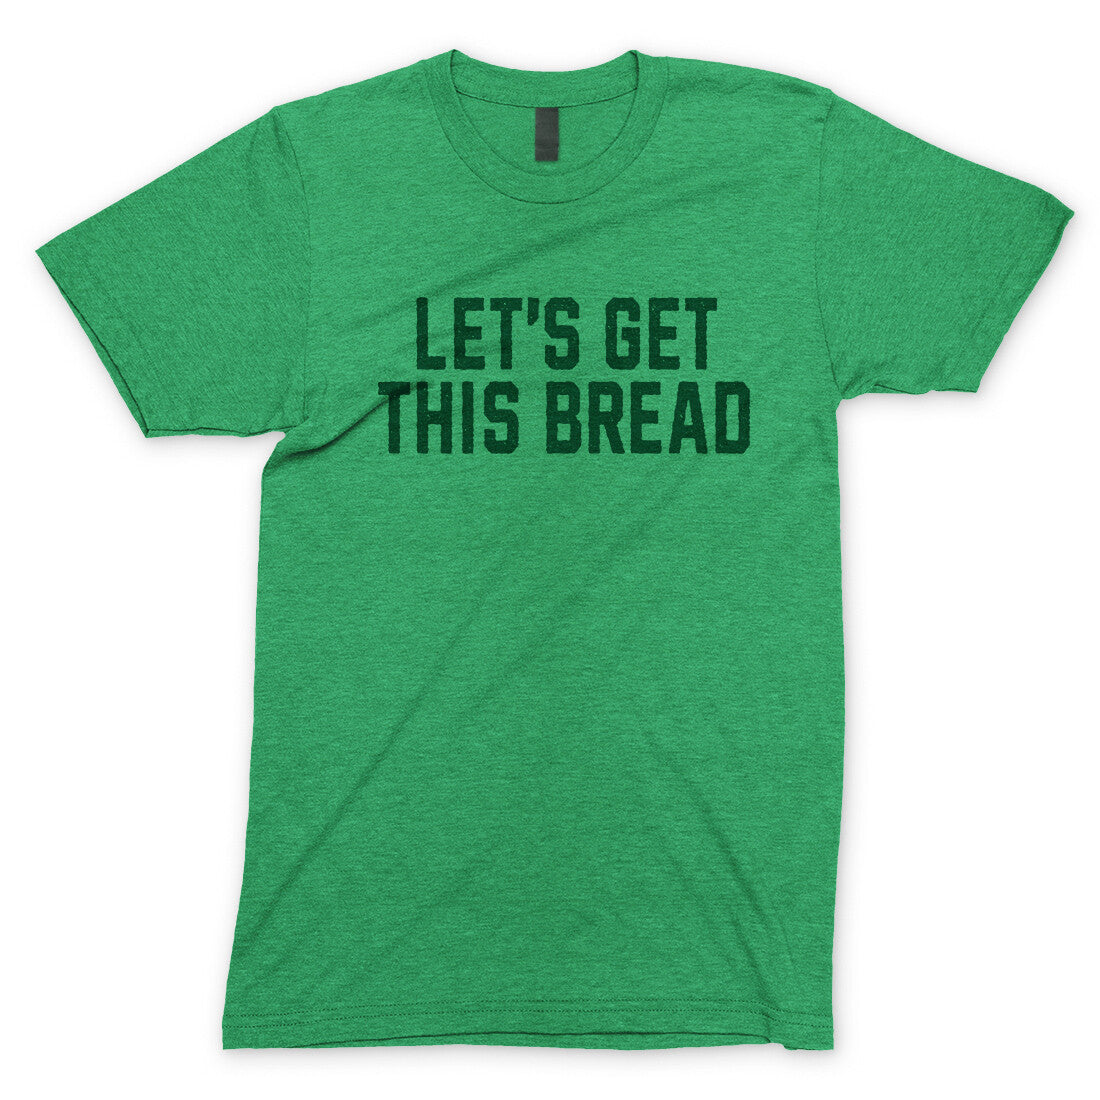 Let's Get This Bread in Heather Irish Green Color